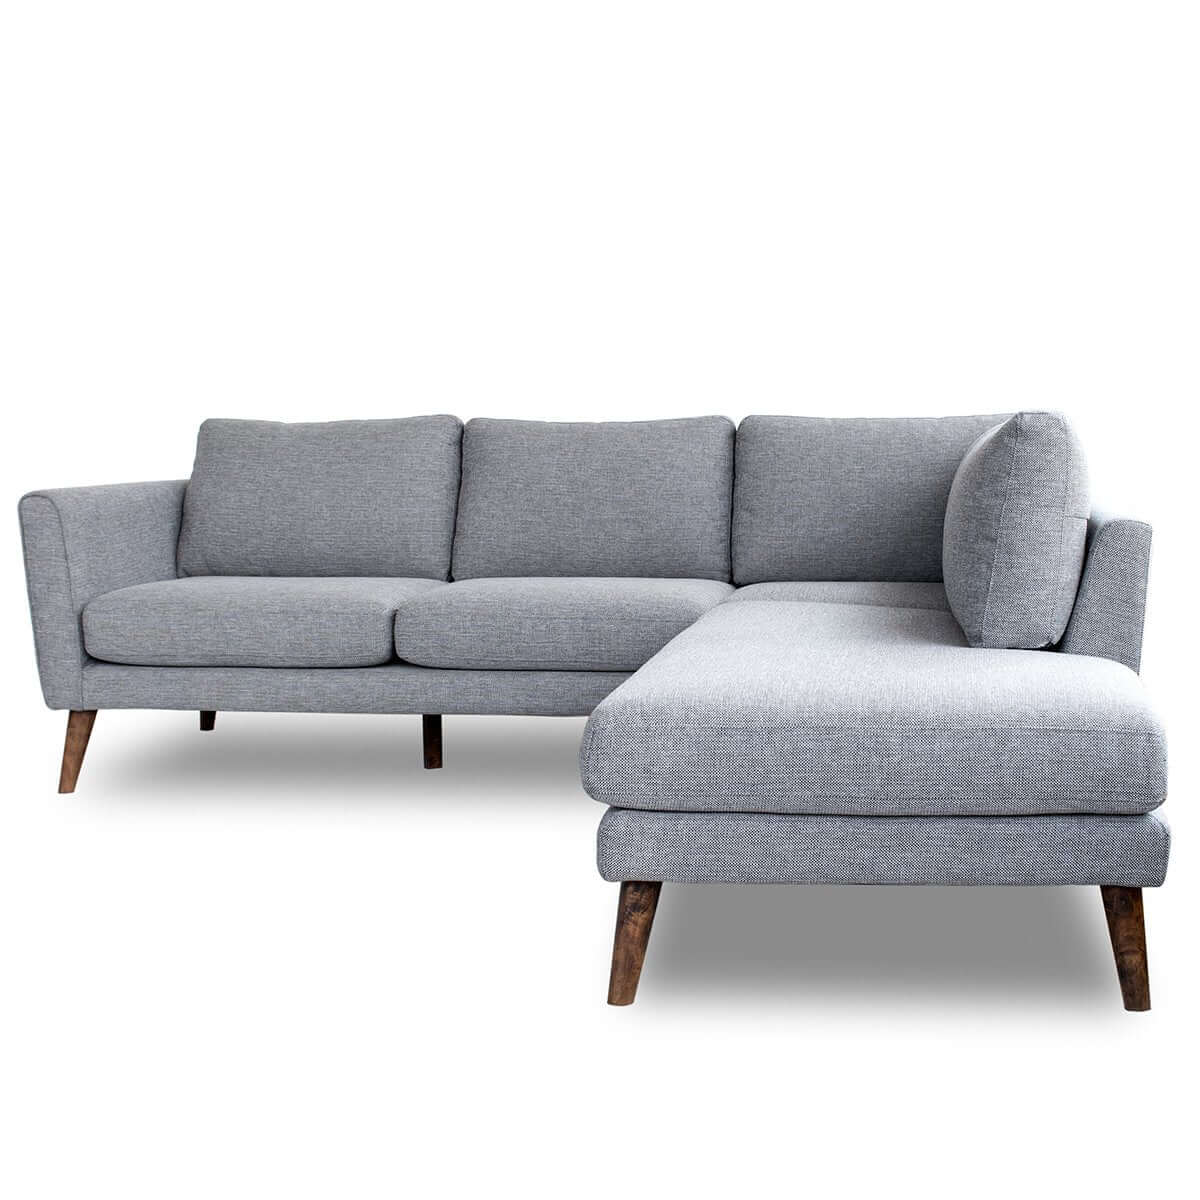 Ashcroft Furniture Co Sectional Sofas Rigth Sectional / Grey Batres Sectional Sofa